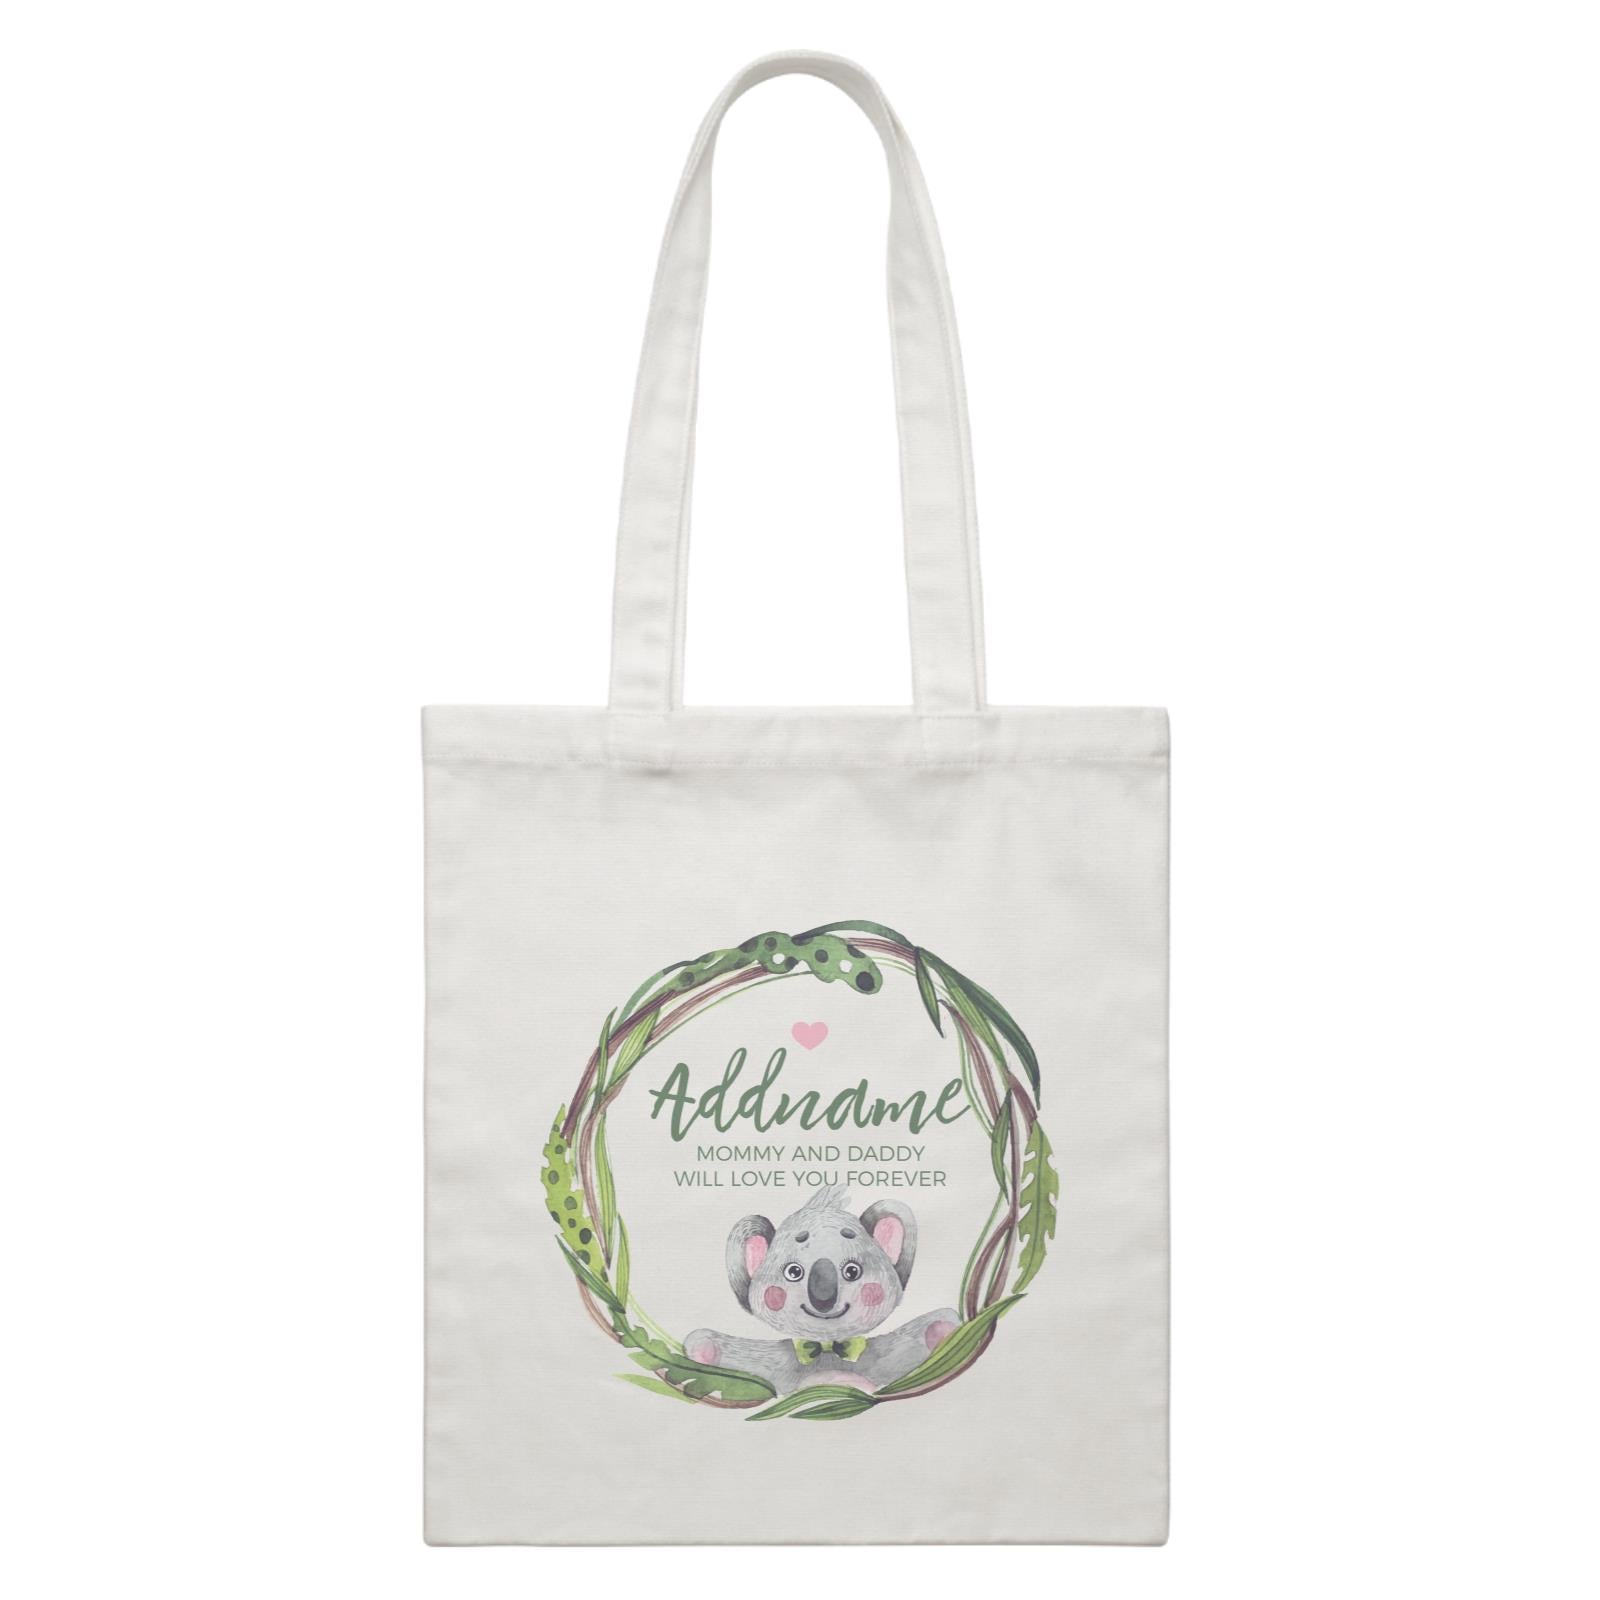 Watercolour Pink Koala Green Leaves Wreath Personalizable with Name and Text White Canvas Bag